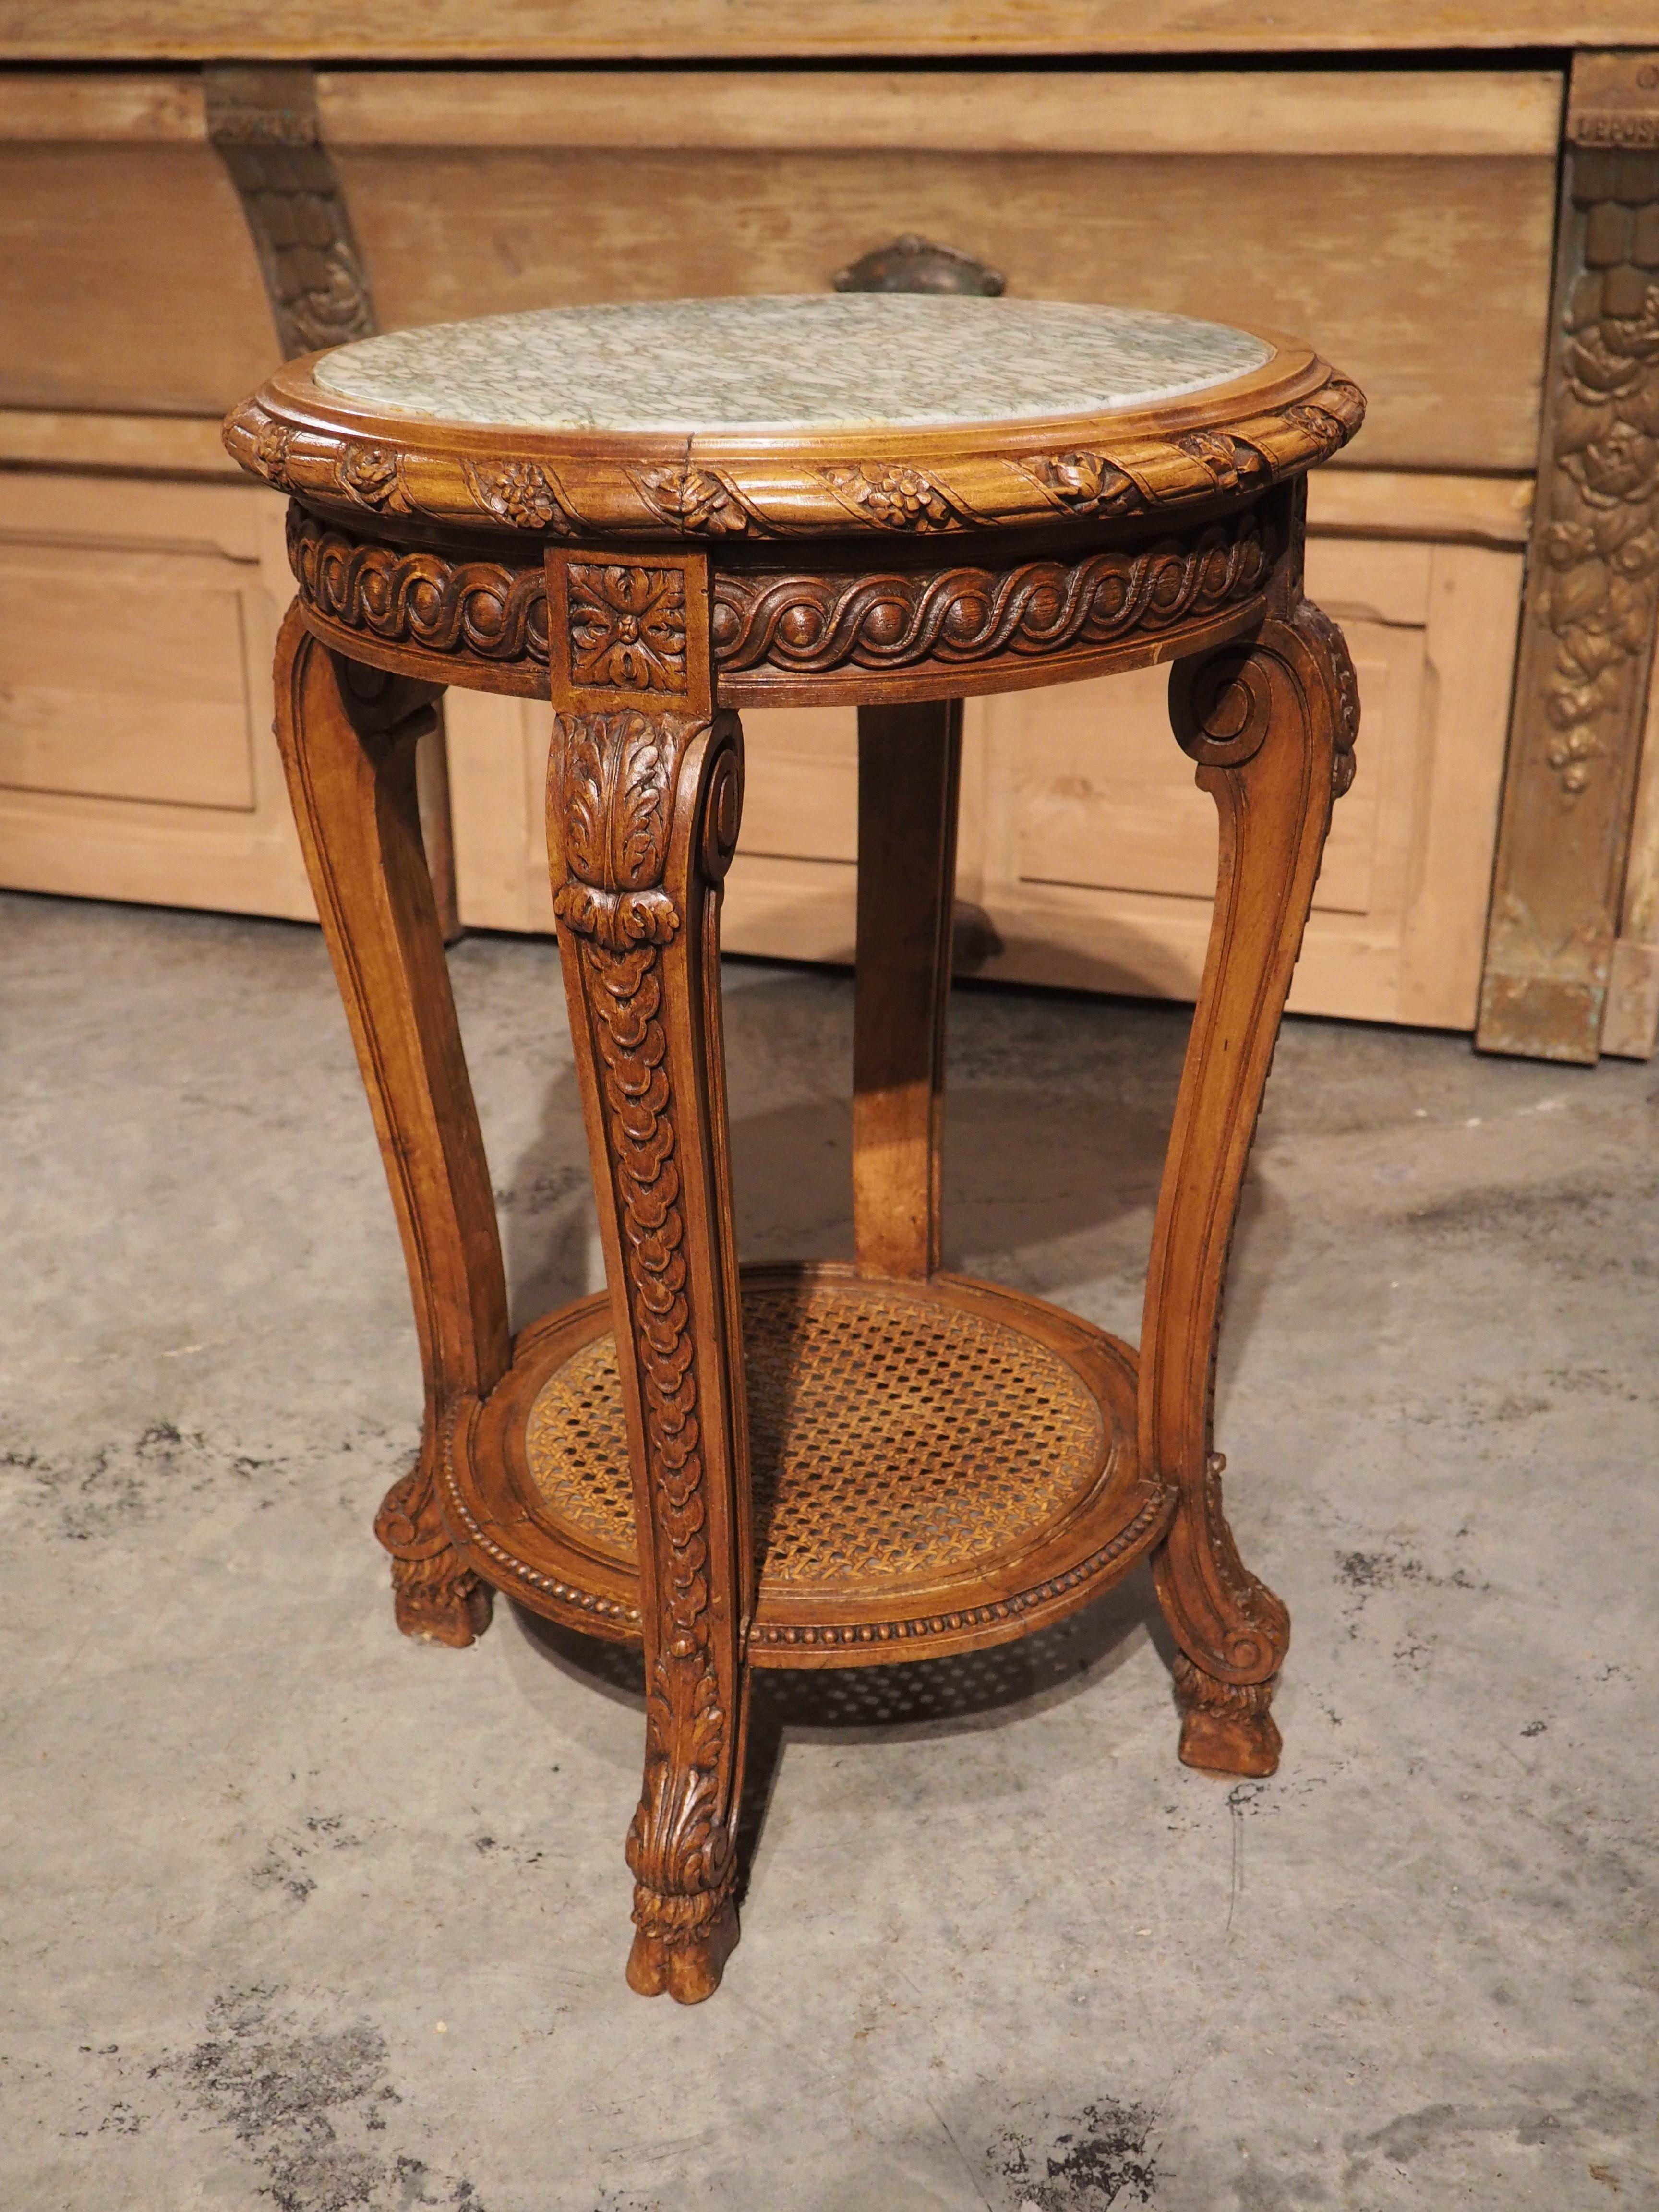 Topped by a lovely light green and white marble top, this Regence style side table was hand carved in France during the late 1800s. The circular marble is inset into the wood base and encircled by a half round molding adorned with spiral fluting